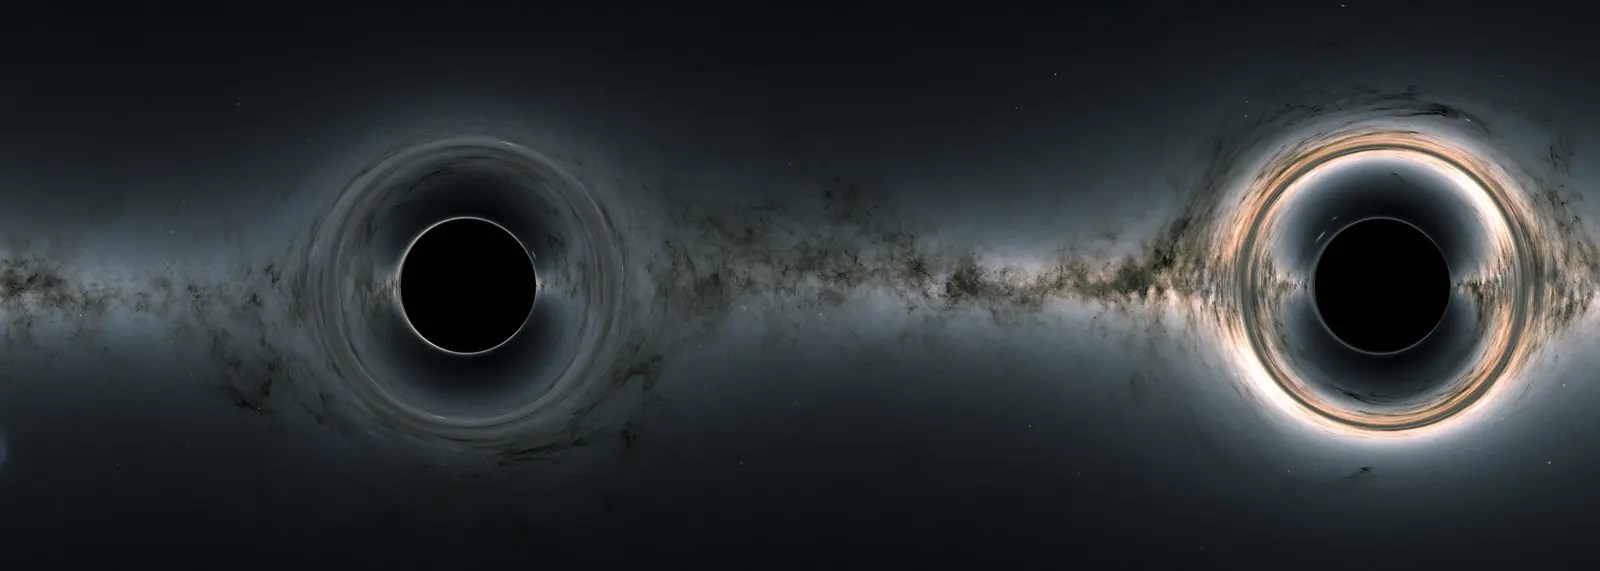 research paper on black hole